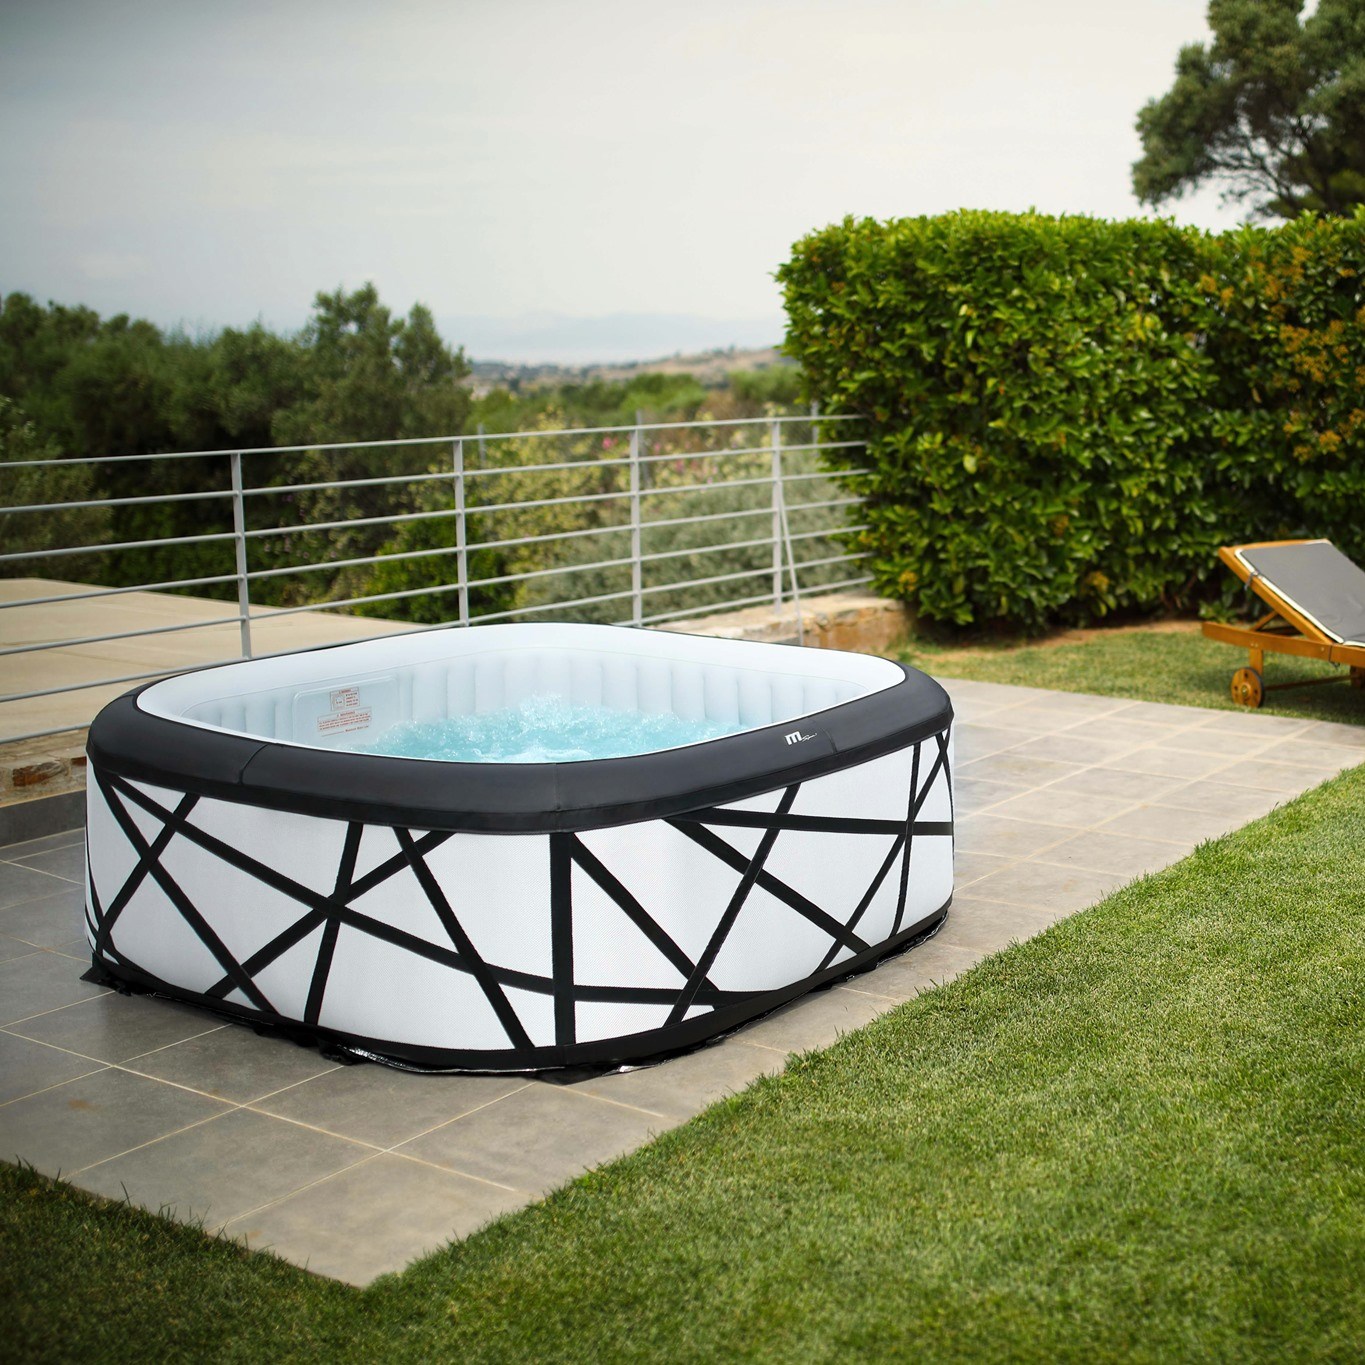 Completely surround your body in a blissful cushion of massaging bubbles in the SOHO air bath. The extra-spacious square... » Outdoor Furniture Fuengirola, Costa Del Sol, Spain